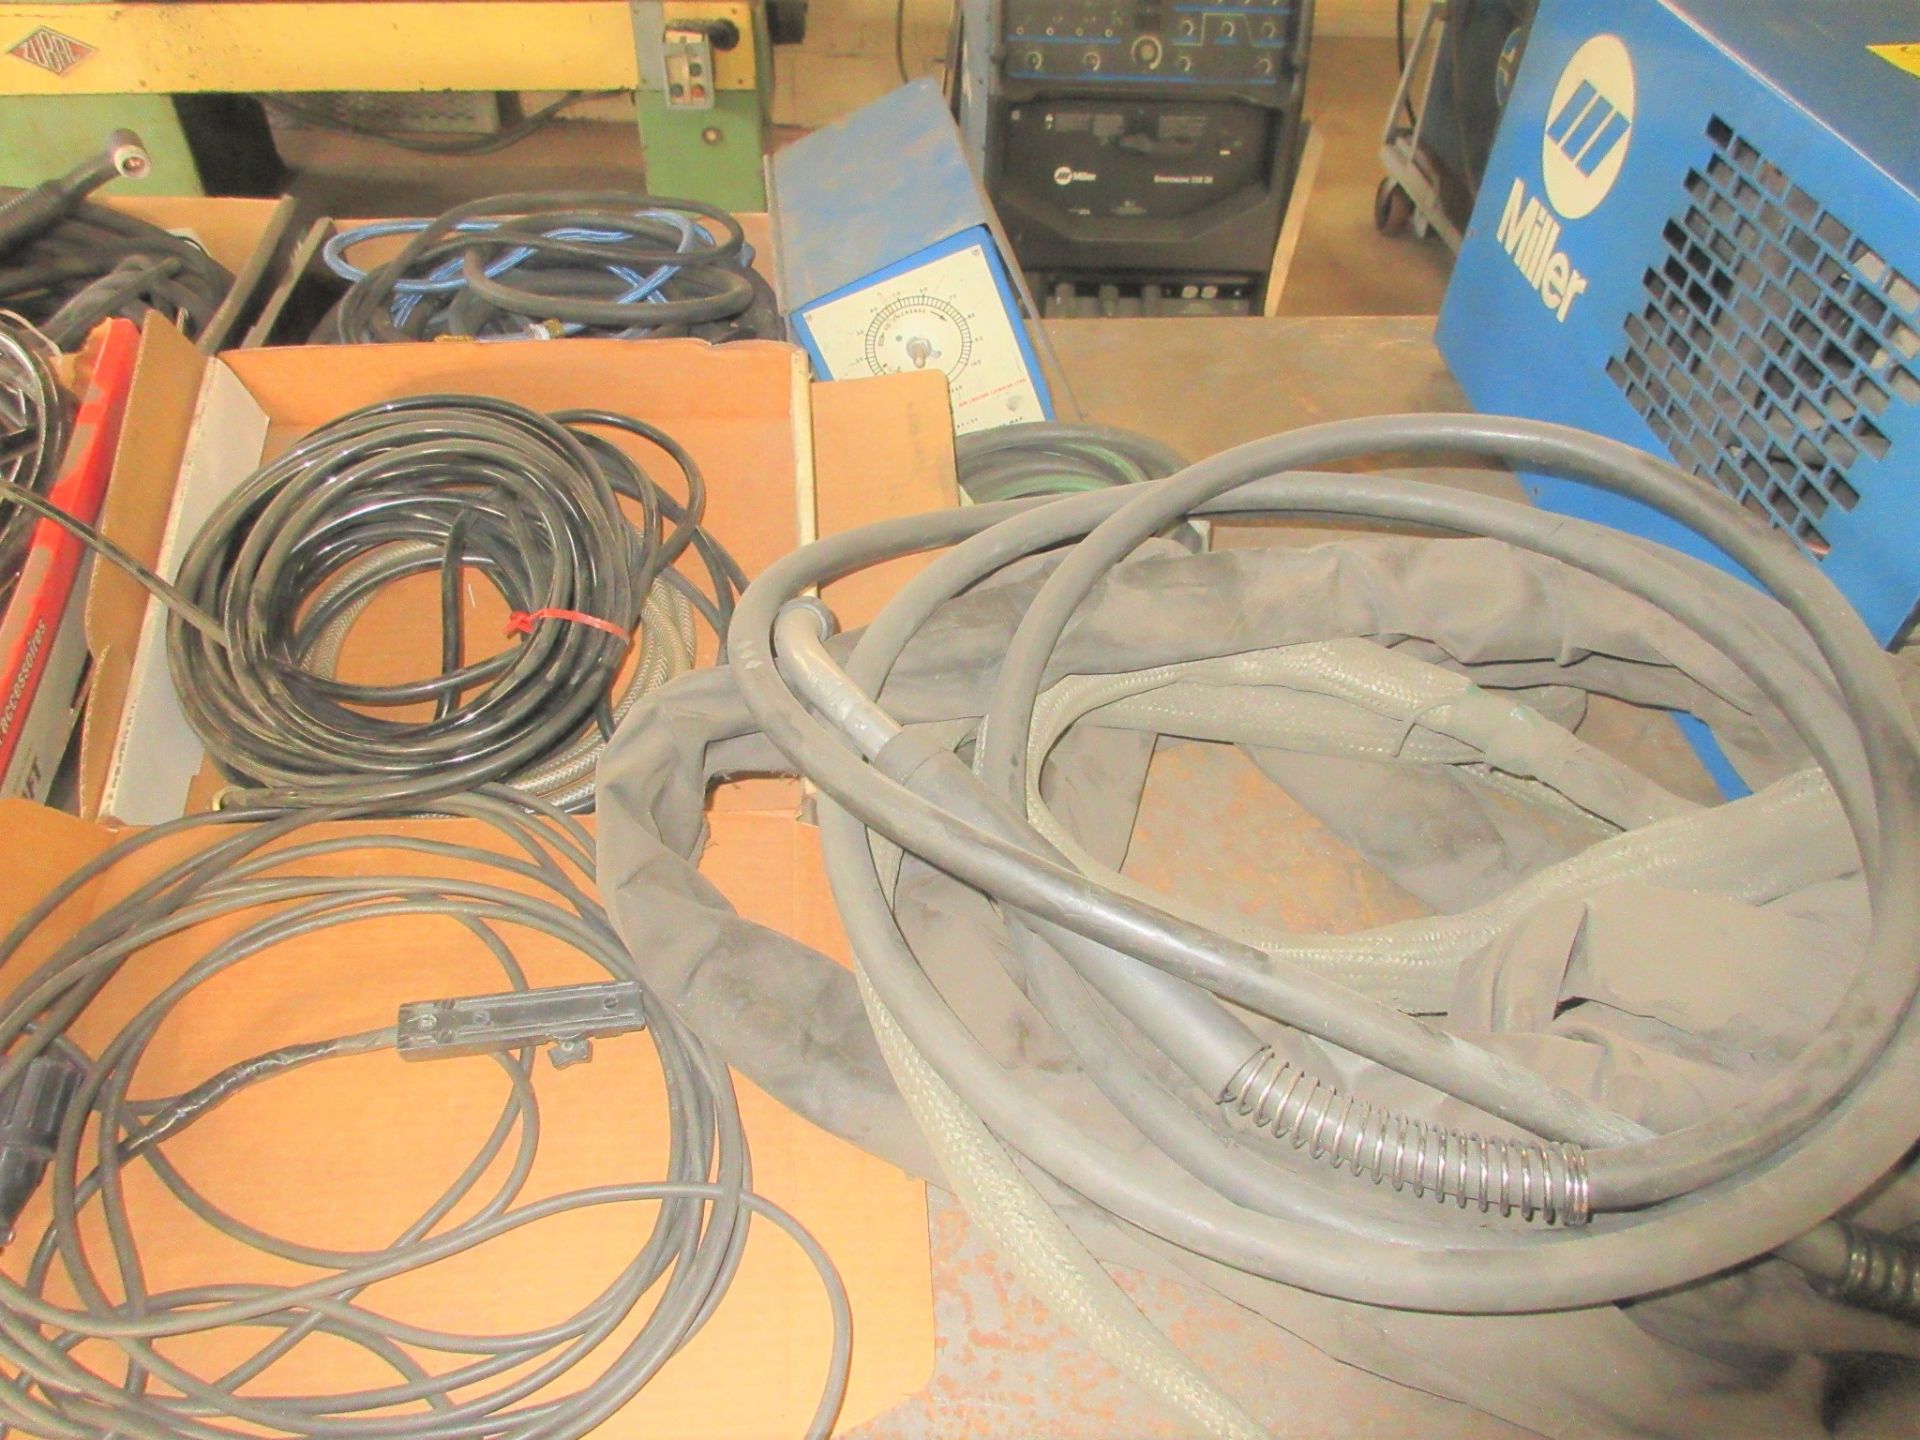 LOT OF WELDING CABLES, TIG / MIG GUNS, ETC. - Image 3 of 4